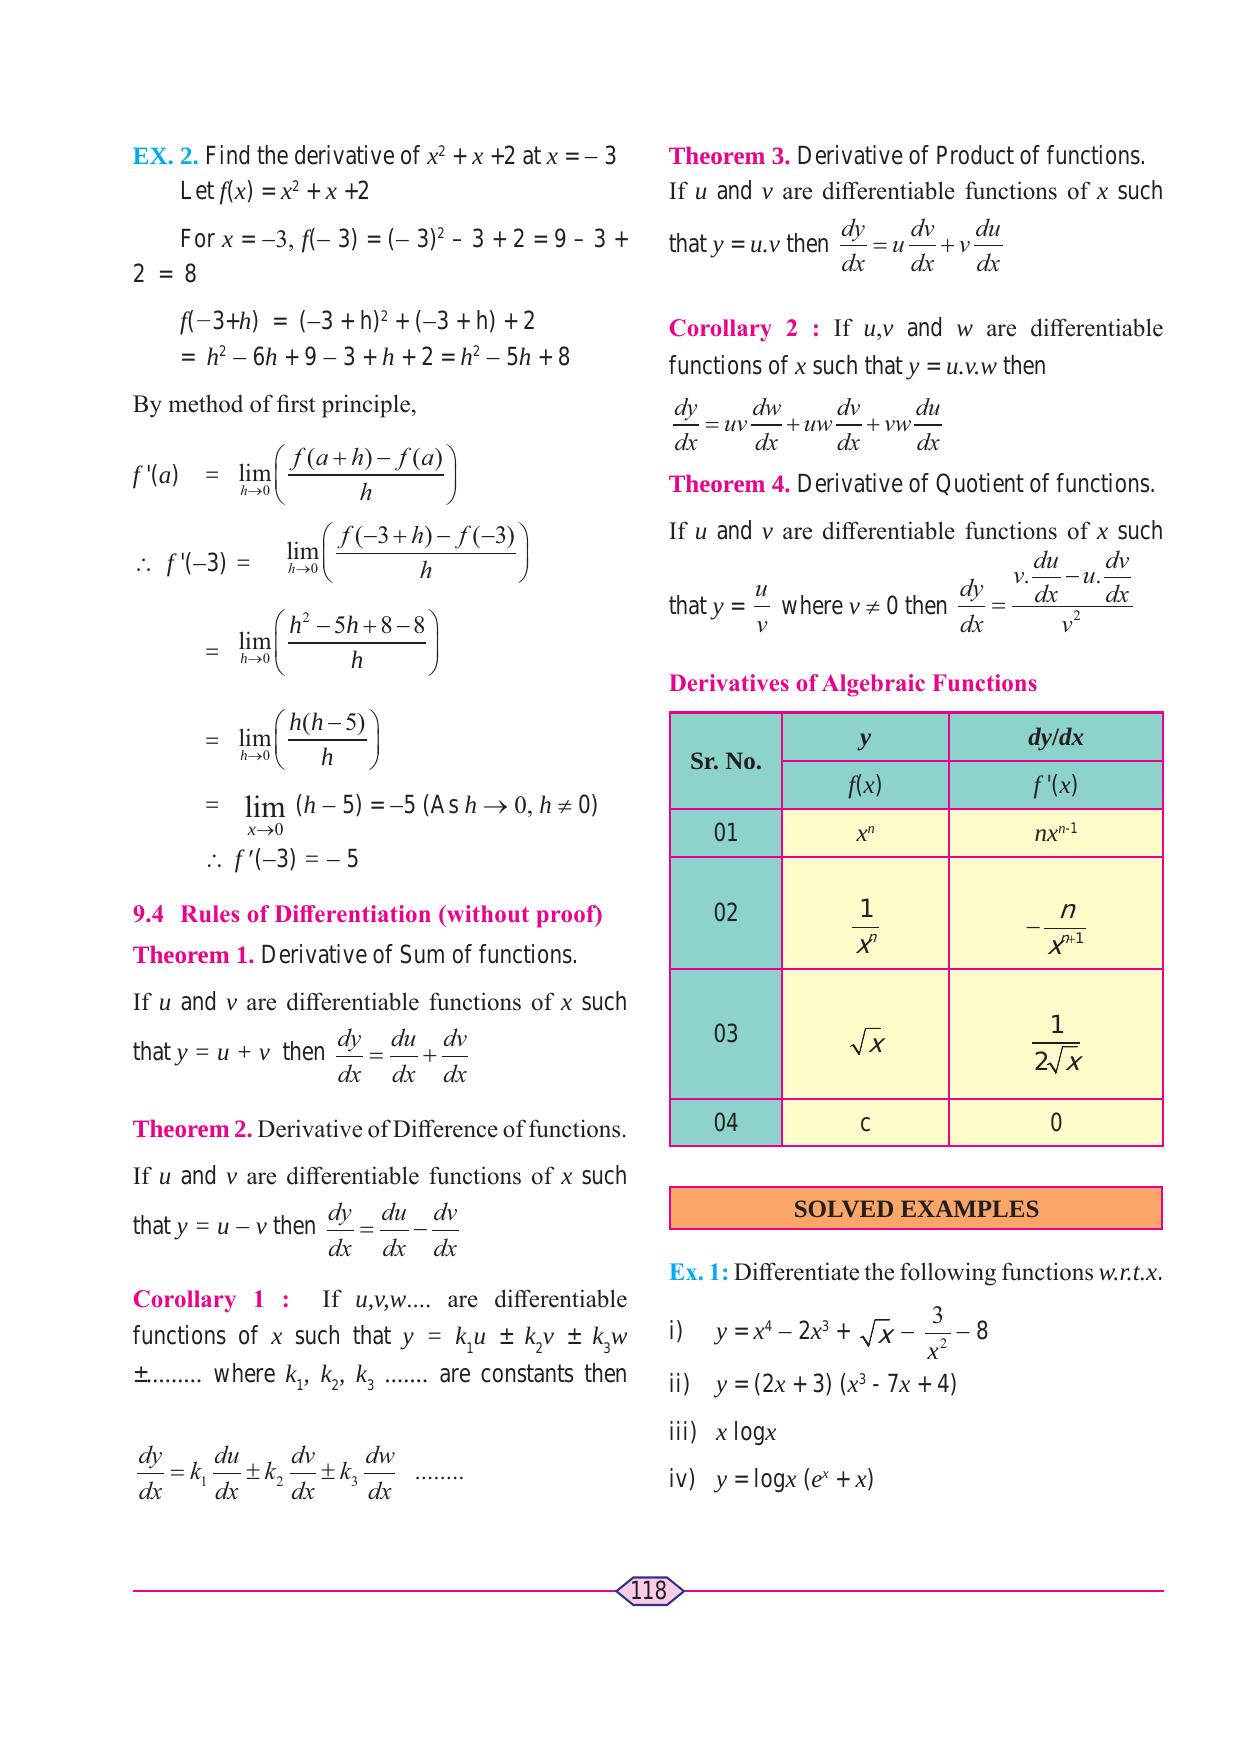 Maharashtra Board Class 11 Maths (Commerce) (Part 1) Textbook - Page 128